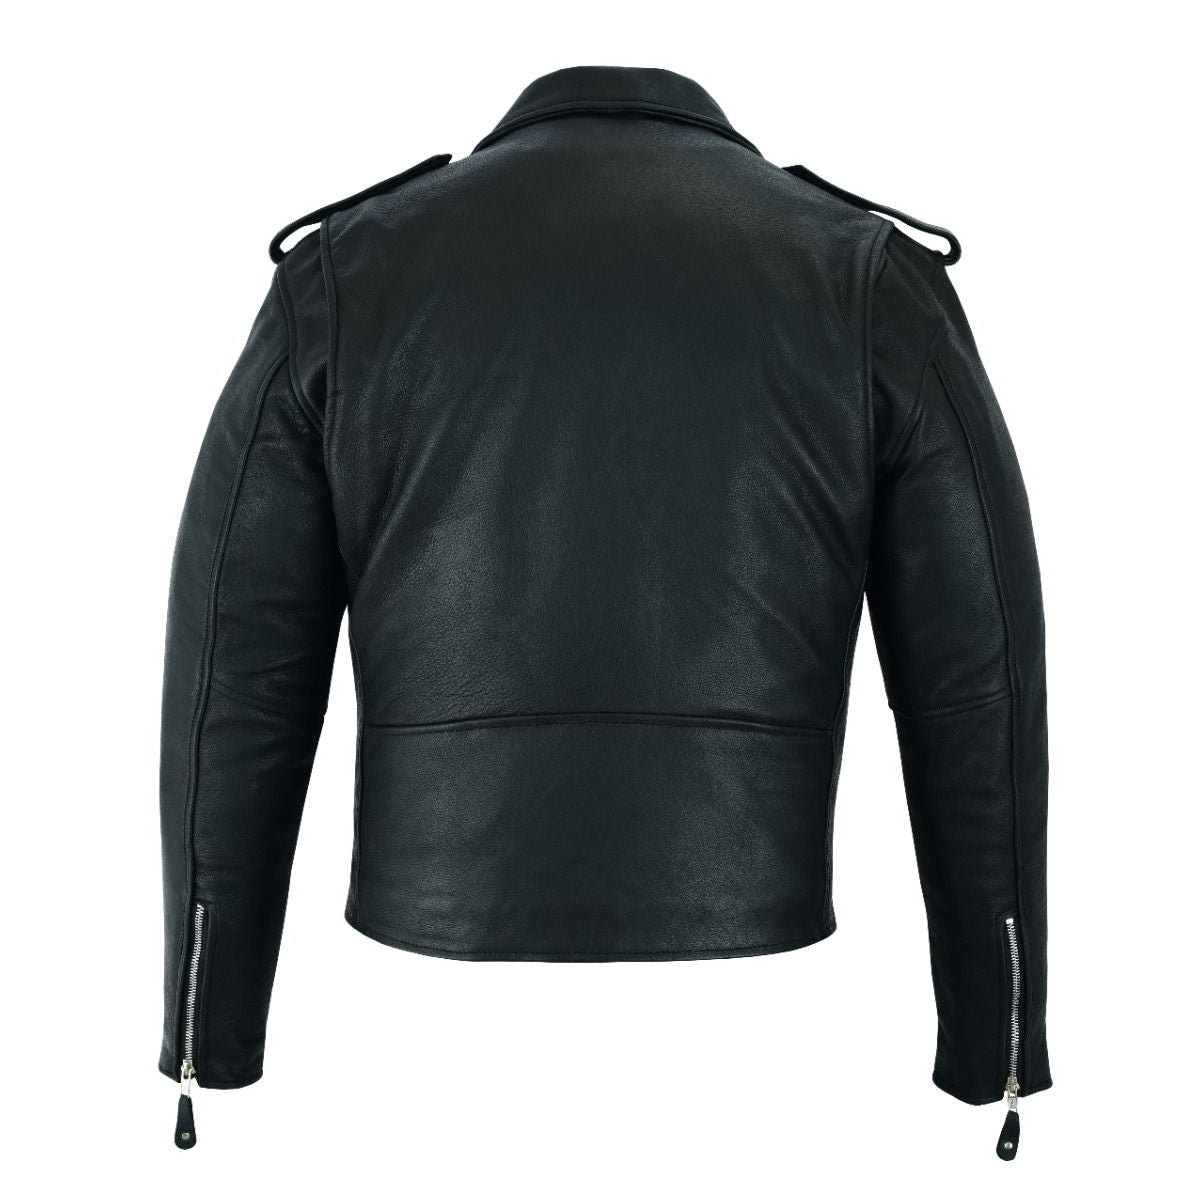 Classic Biker Police Motorcycle MC Jacket Concealed Gun Pockets Naked Cowhide Leather Heavy Duty